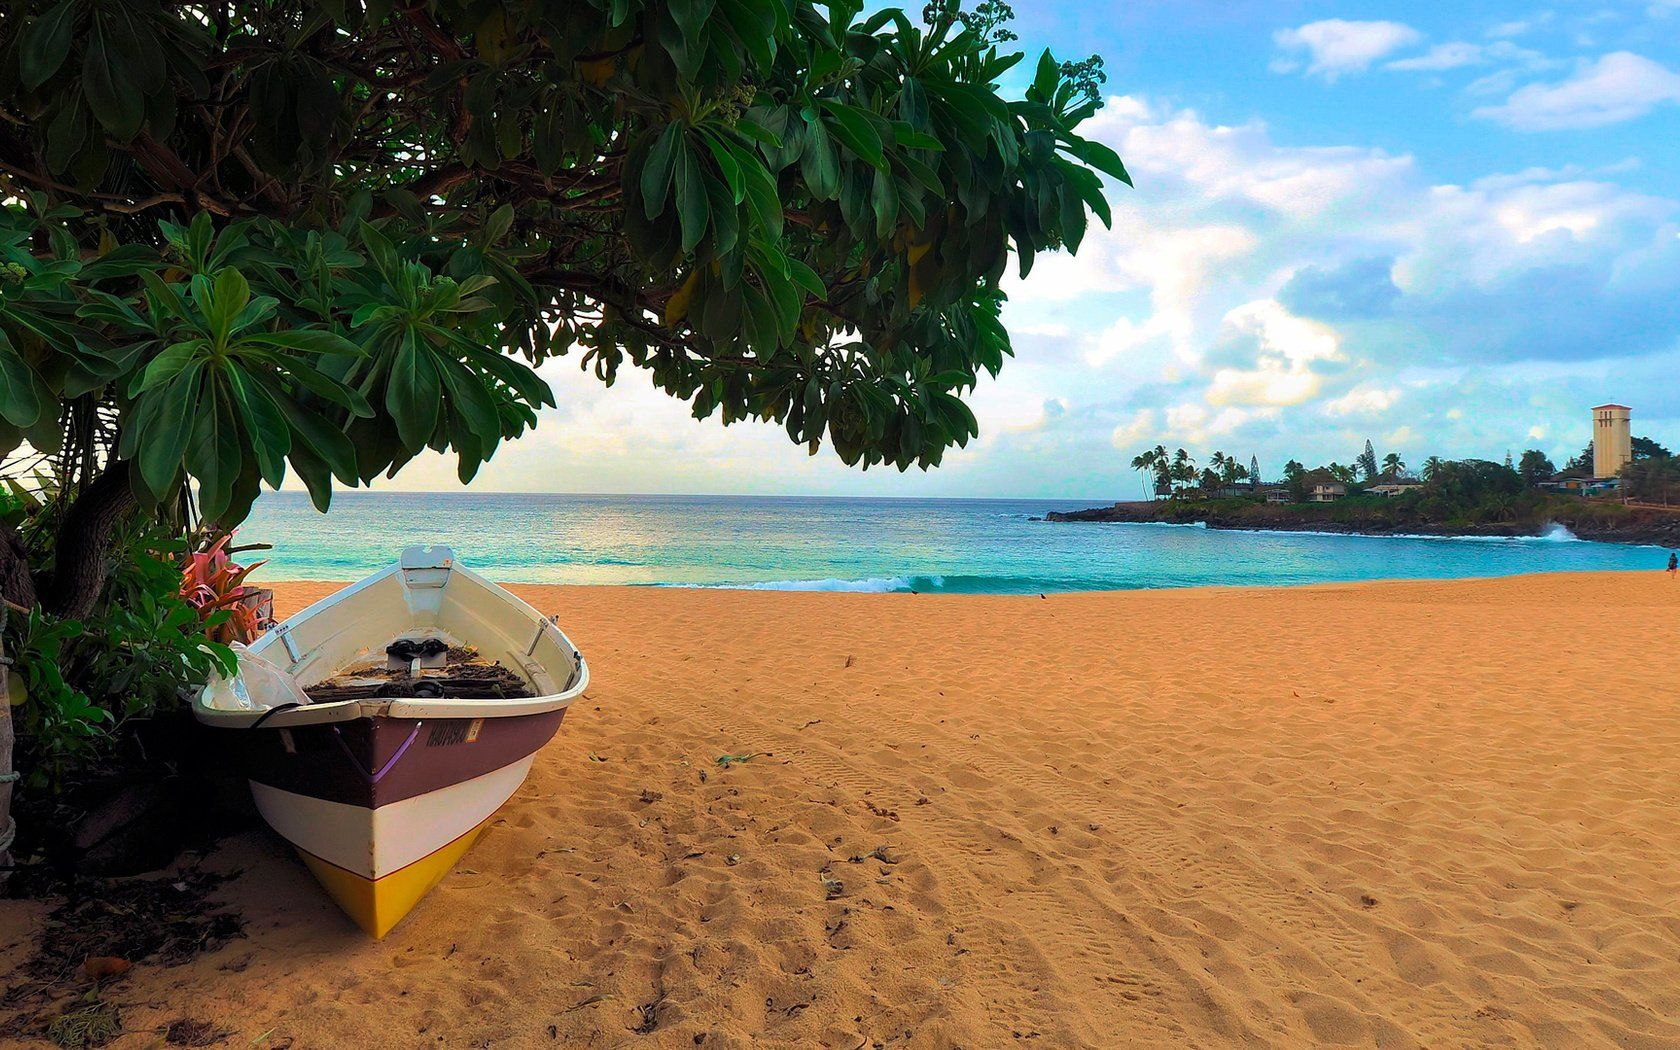 boat on the beach image